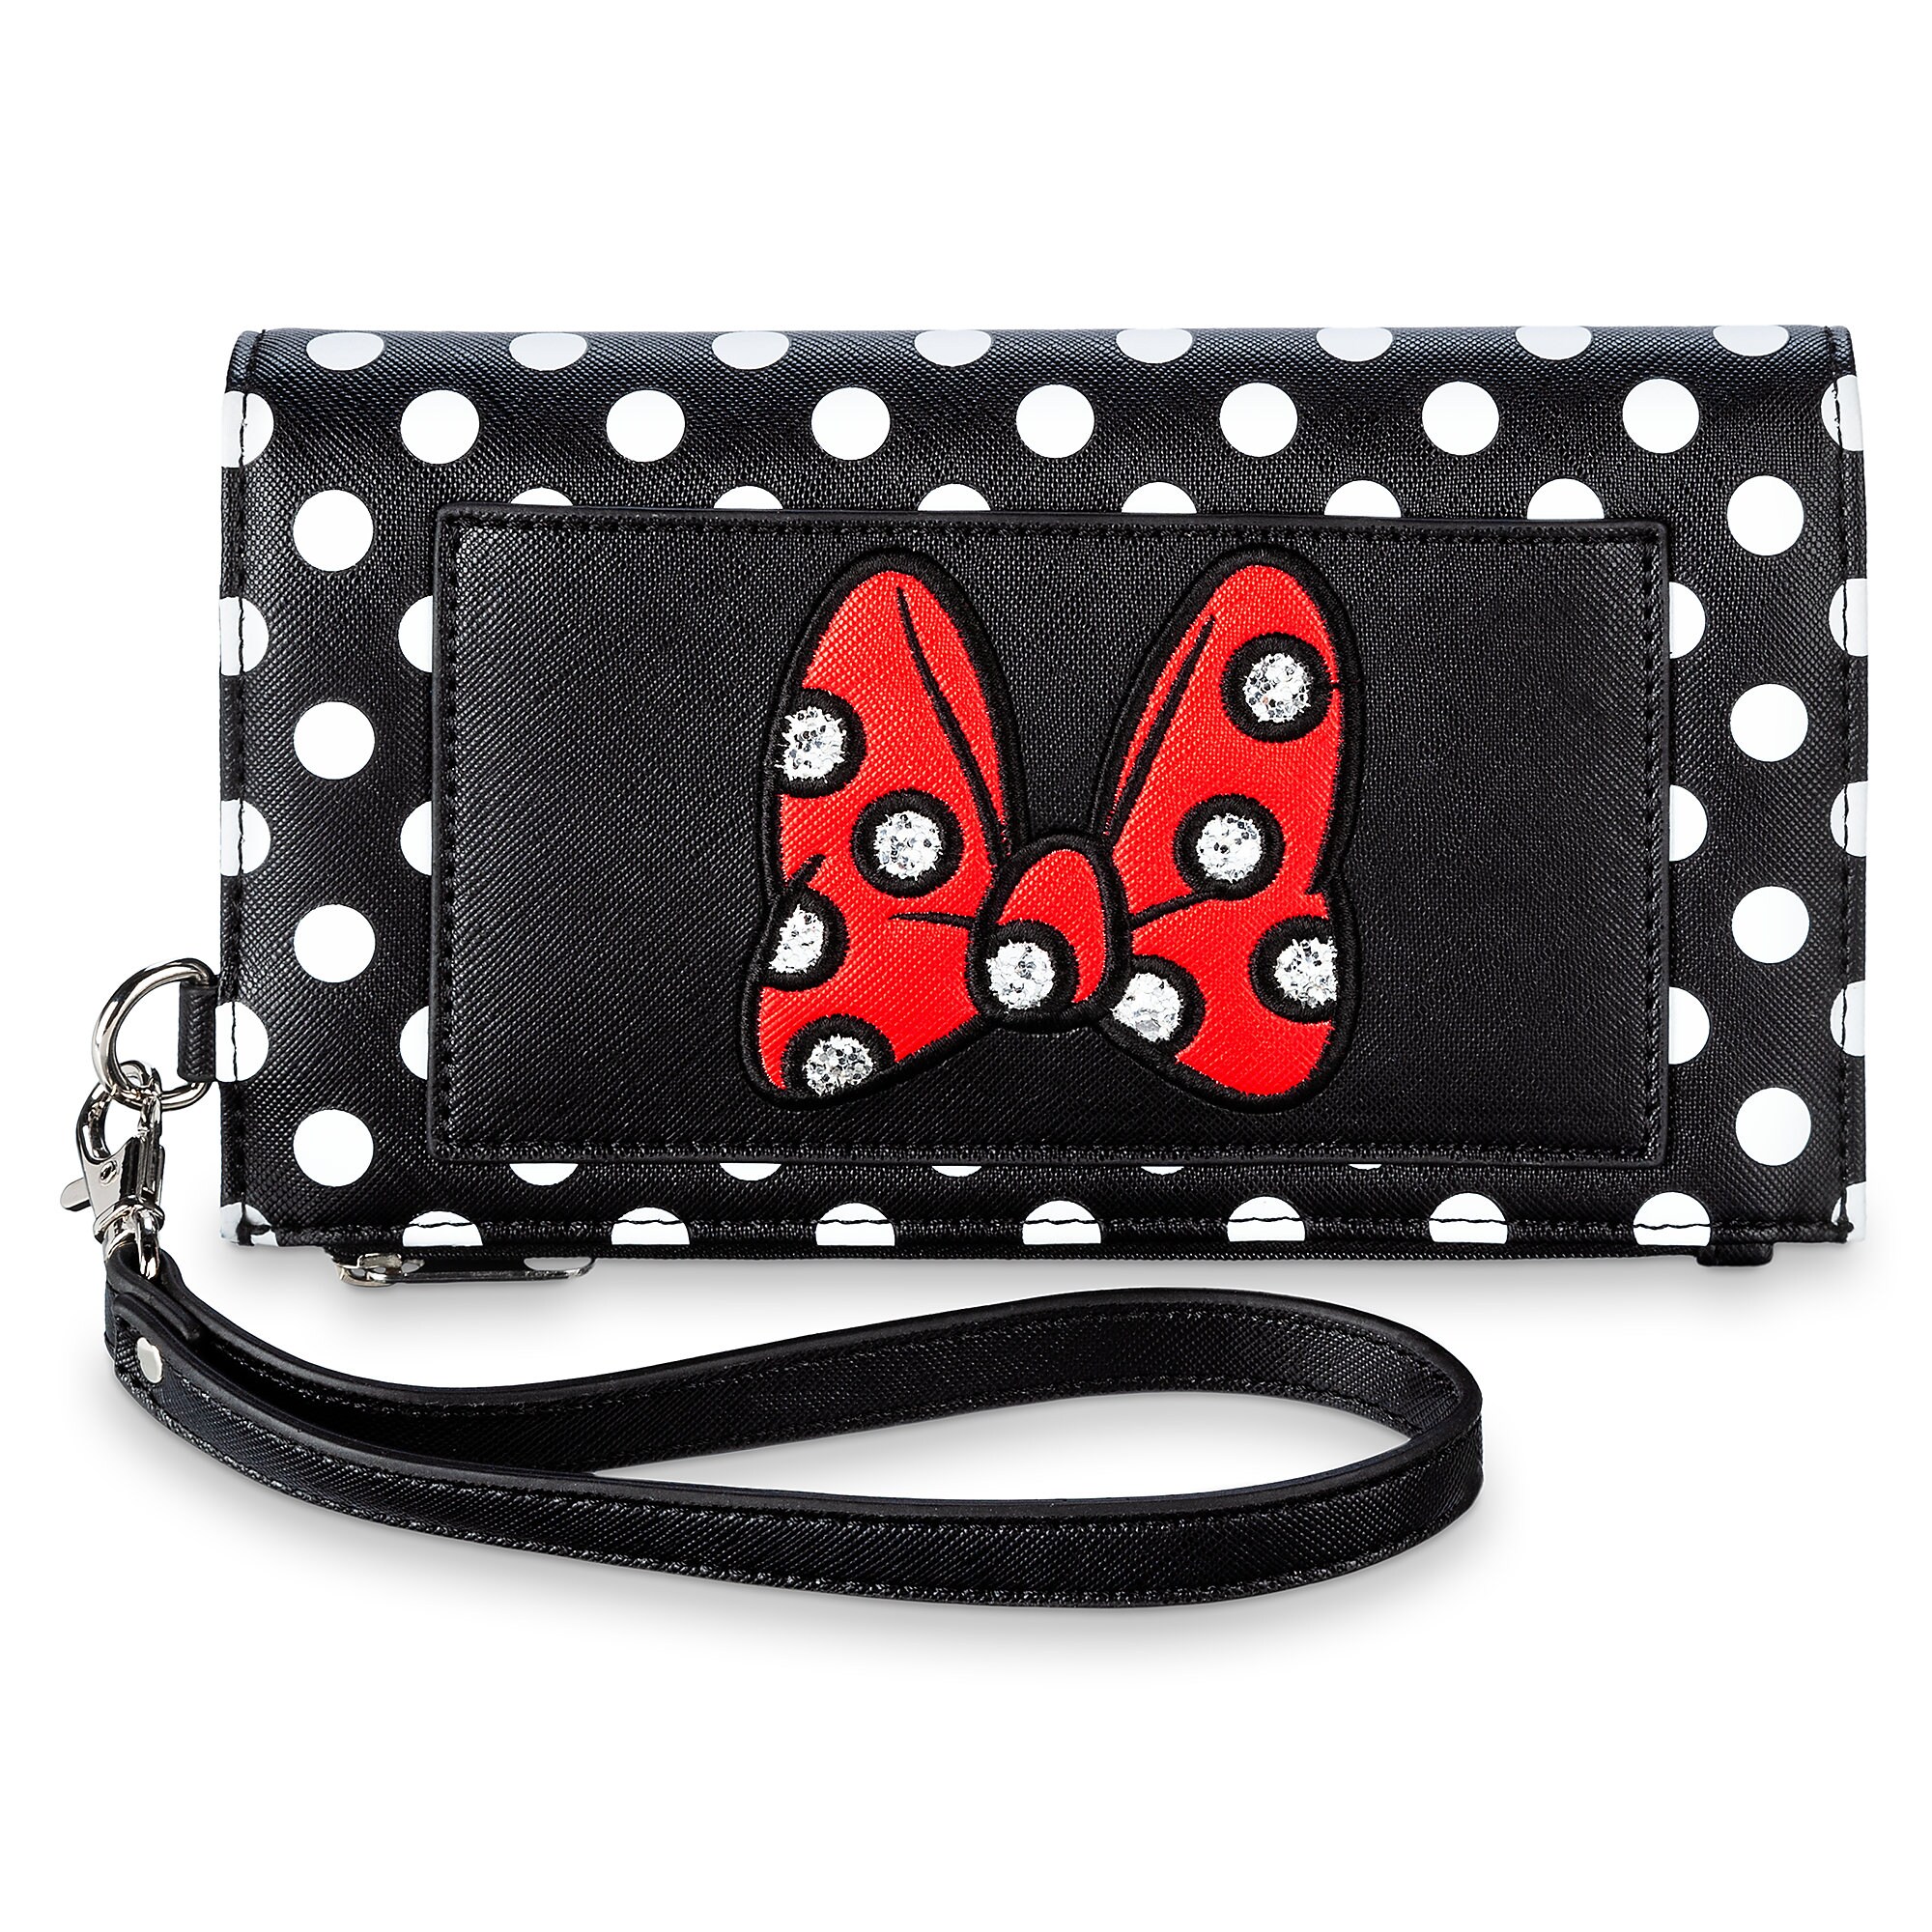 Minnie Mouse Bow Wristlet now available for purchase – Dis Merchandise News